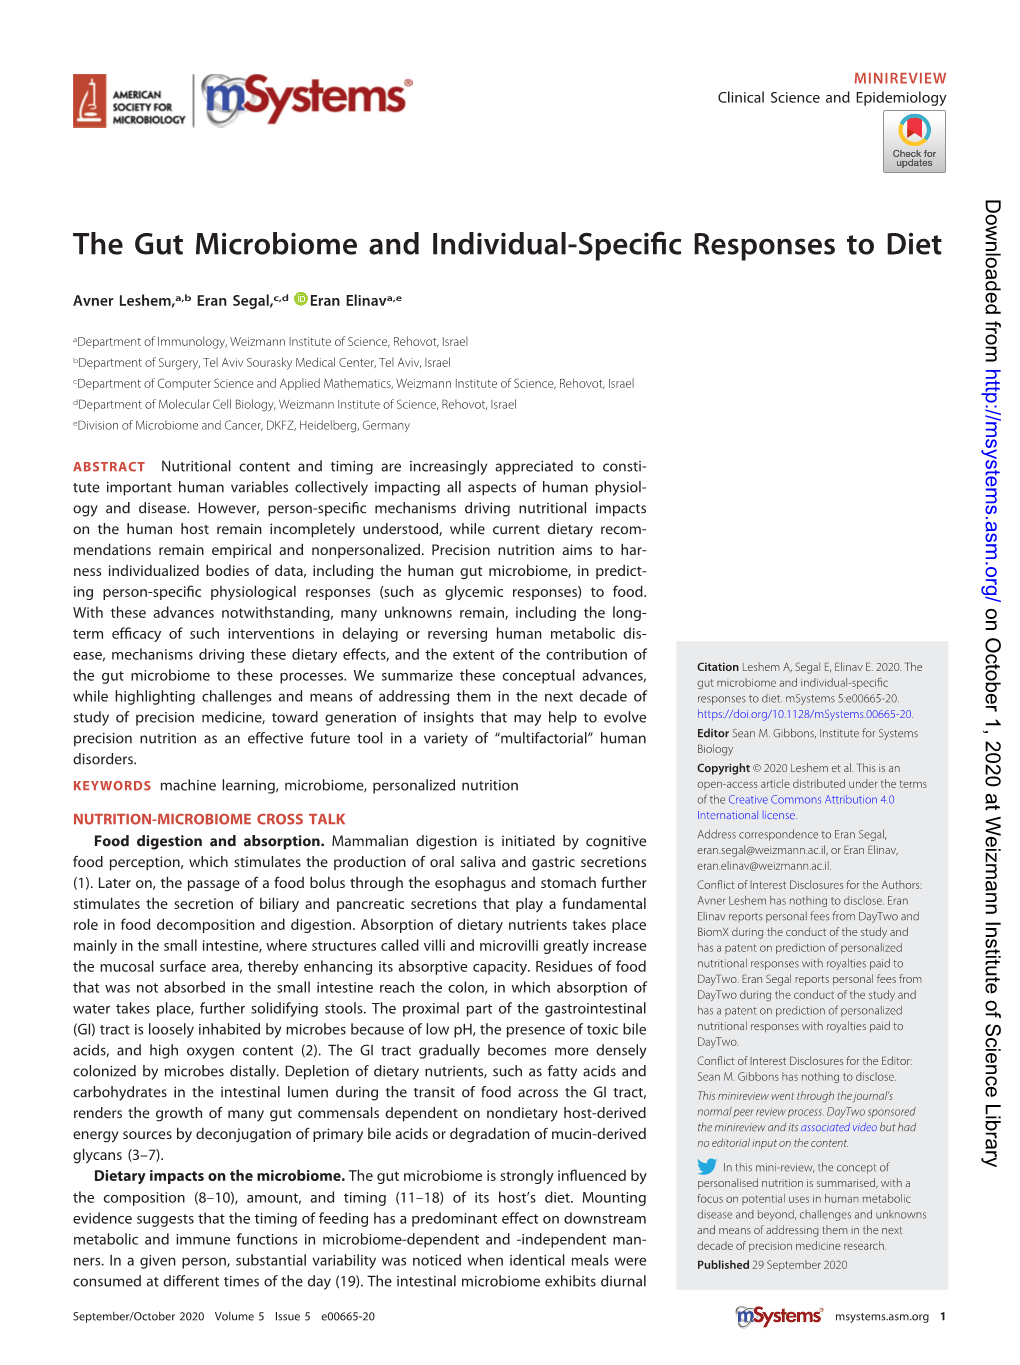 The Gut Microbiome and Individual-Specific Responses to Diet